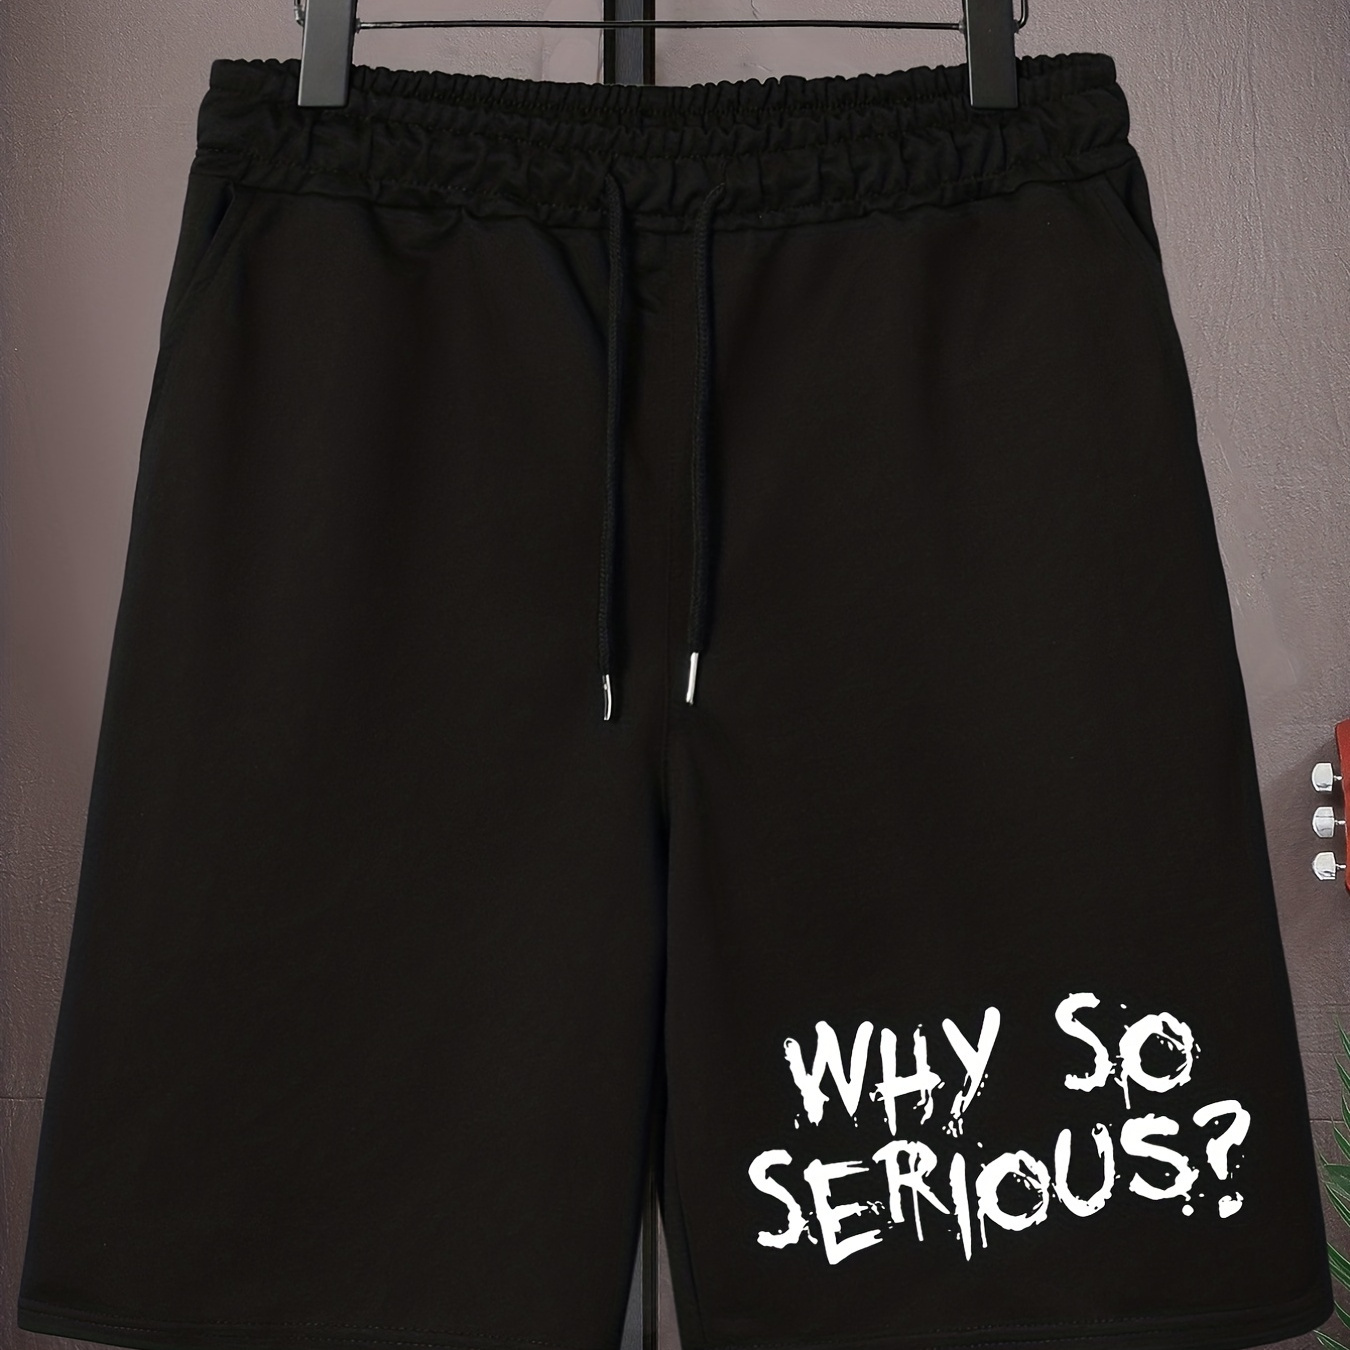 

Men's Plus Size Drawstring Shorts, ''why So Serious'' Print Oversized Elastic Short Sports Pants For Big And Tall Guys, Spring & Summer Wear